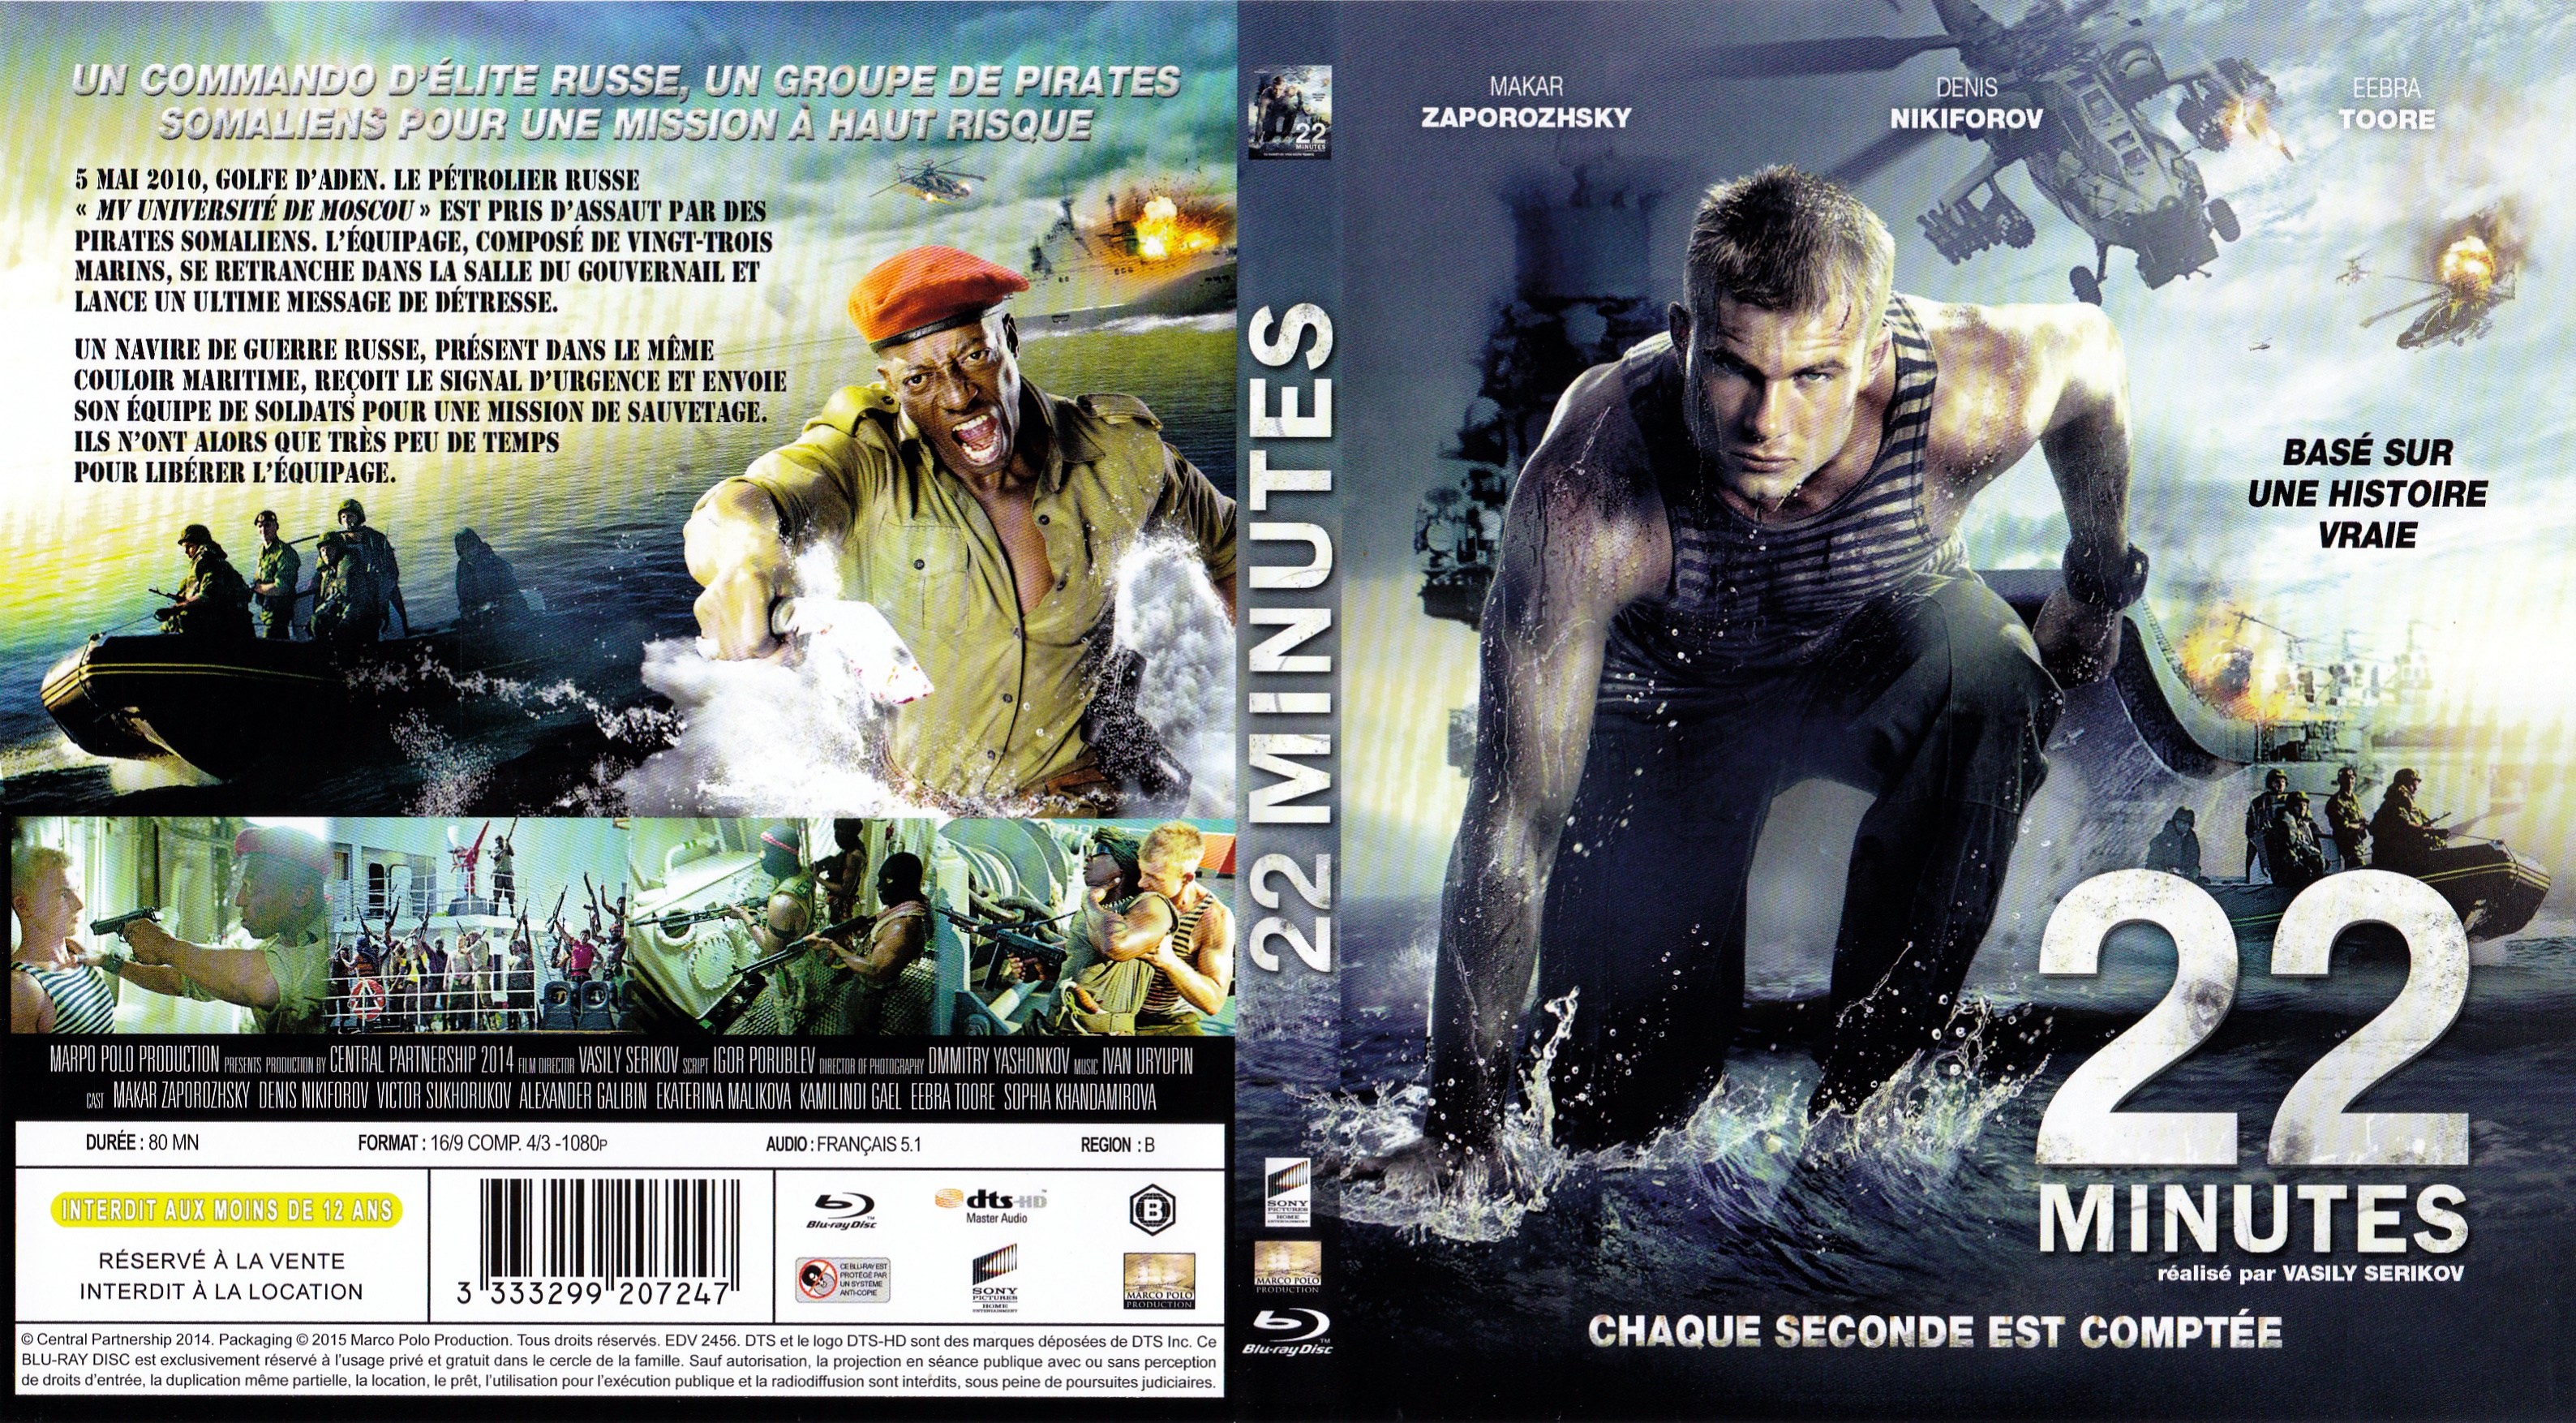 Jaquette DVD 22 minutes (BLU-RAY)